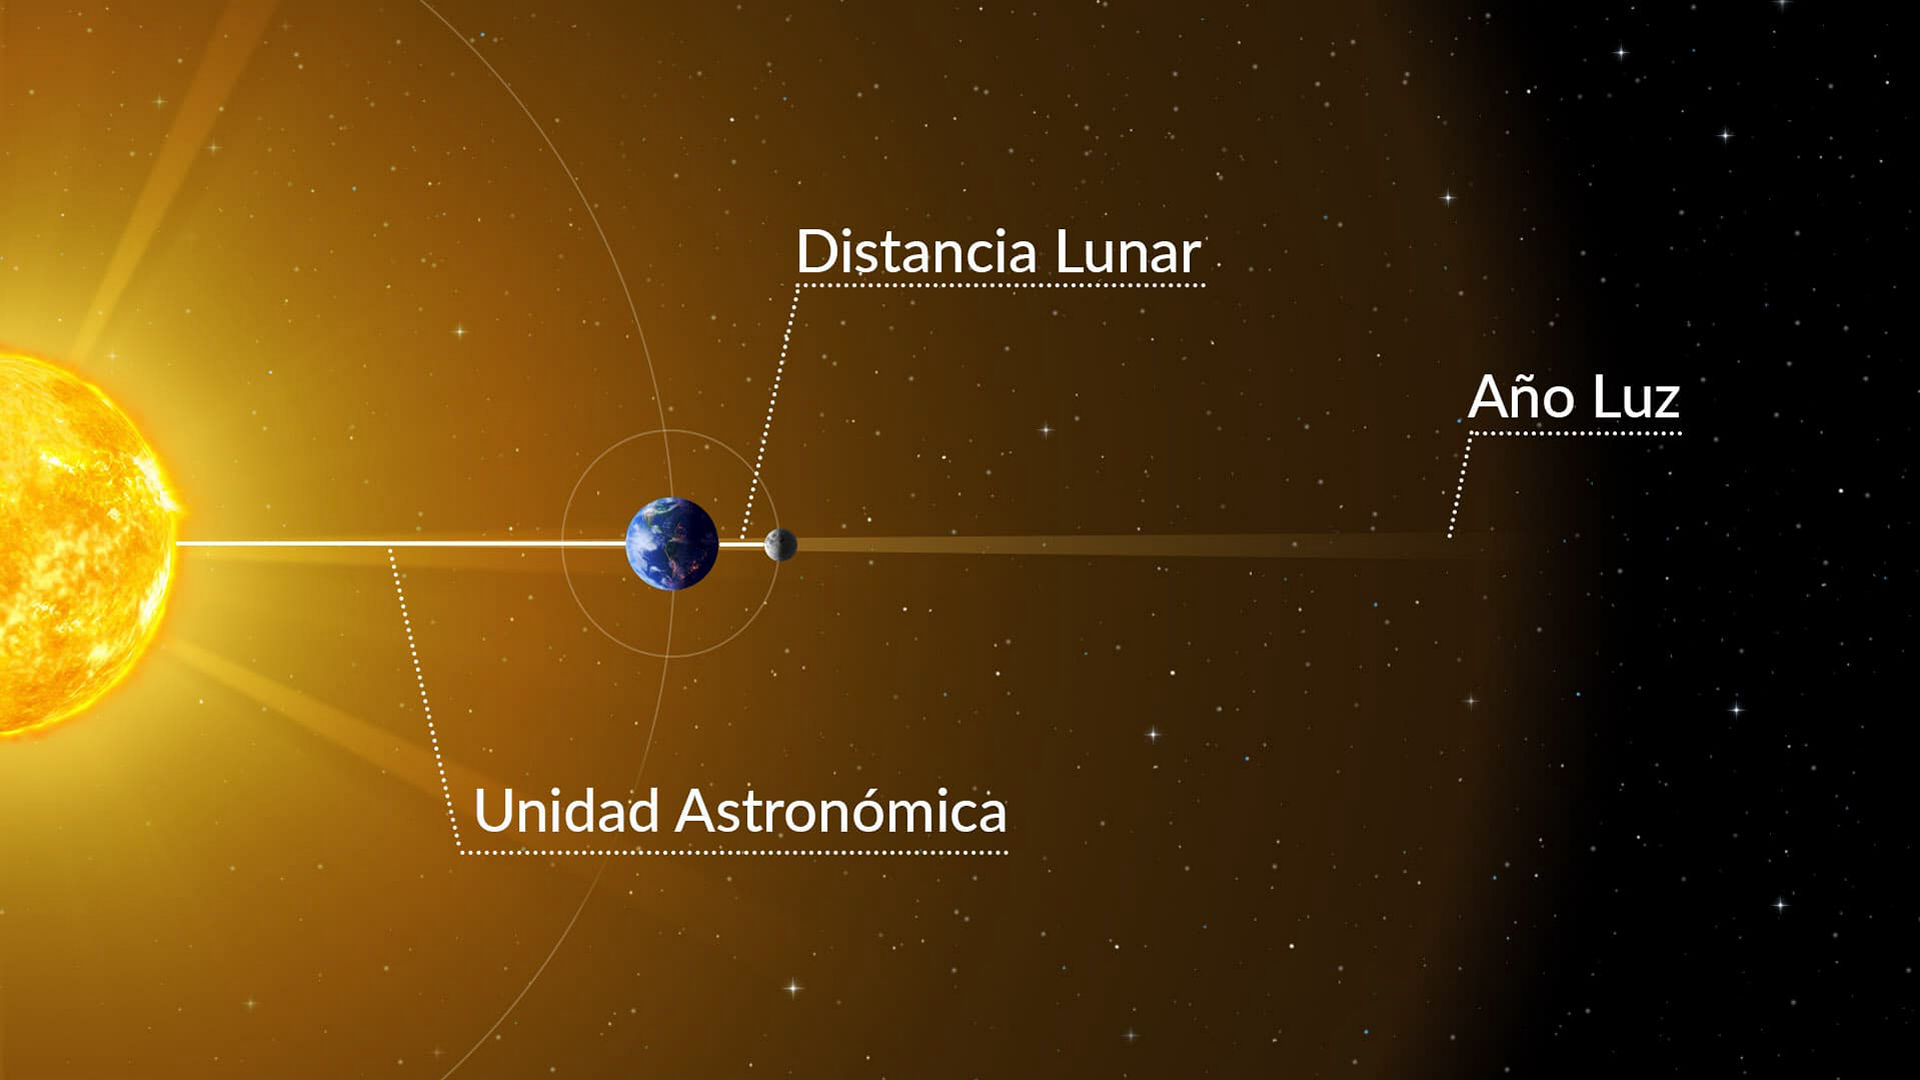 Units of distance used in astronomy